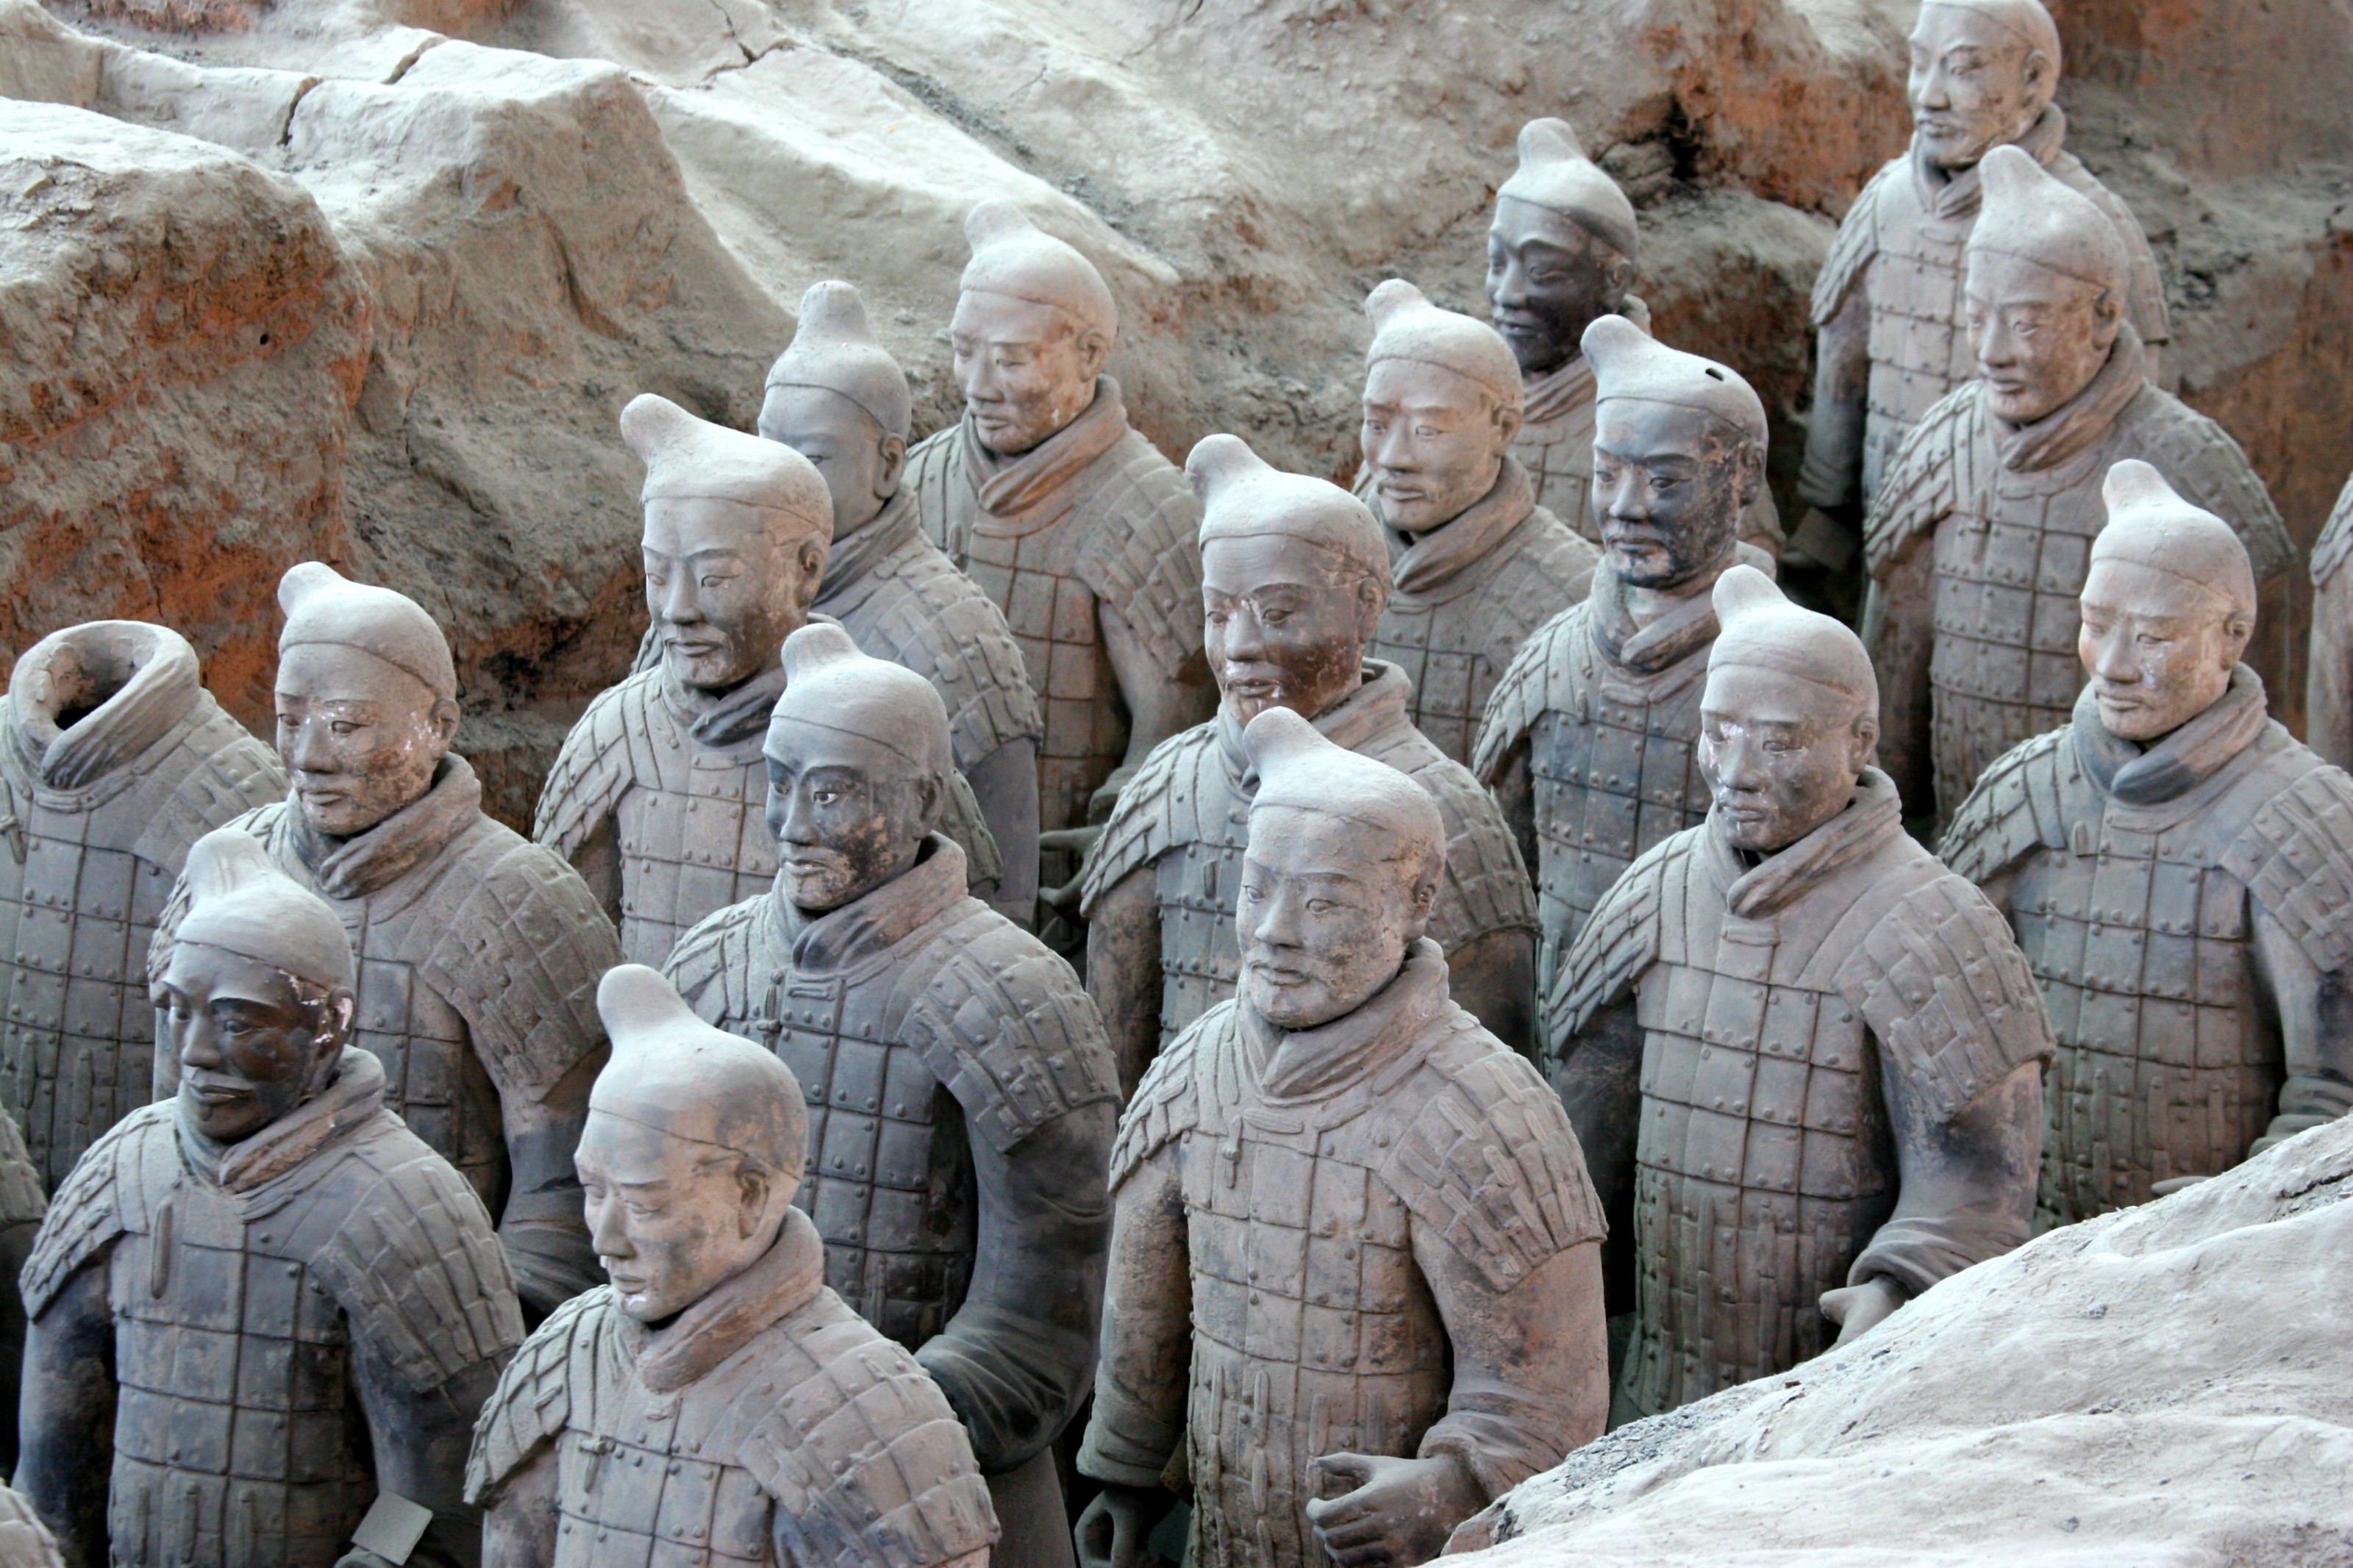 Damage caused to one of the terracotta warriors while on display in the US created an outcry in China. Photo: Shutterstock